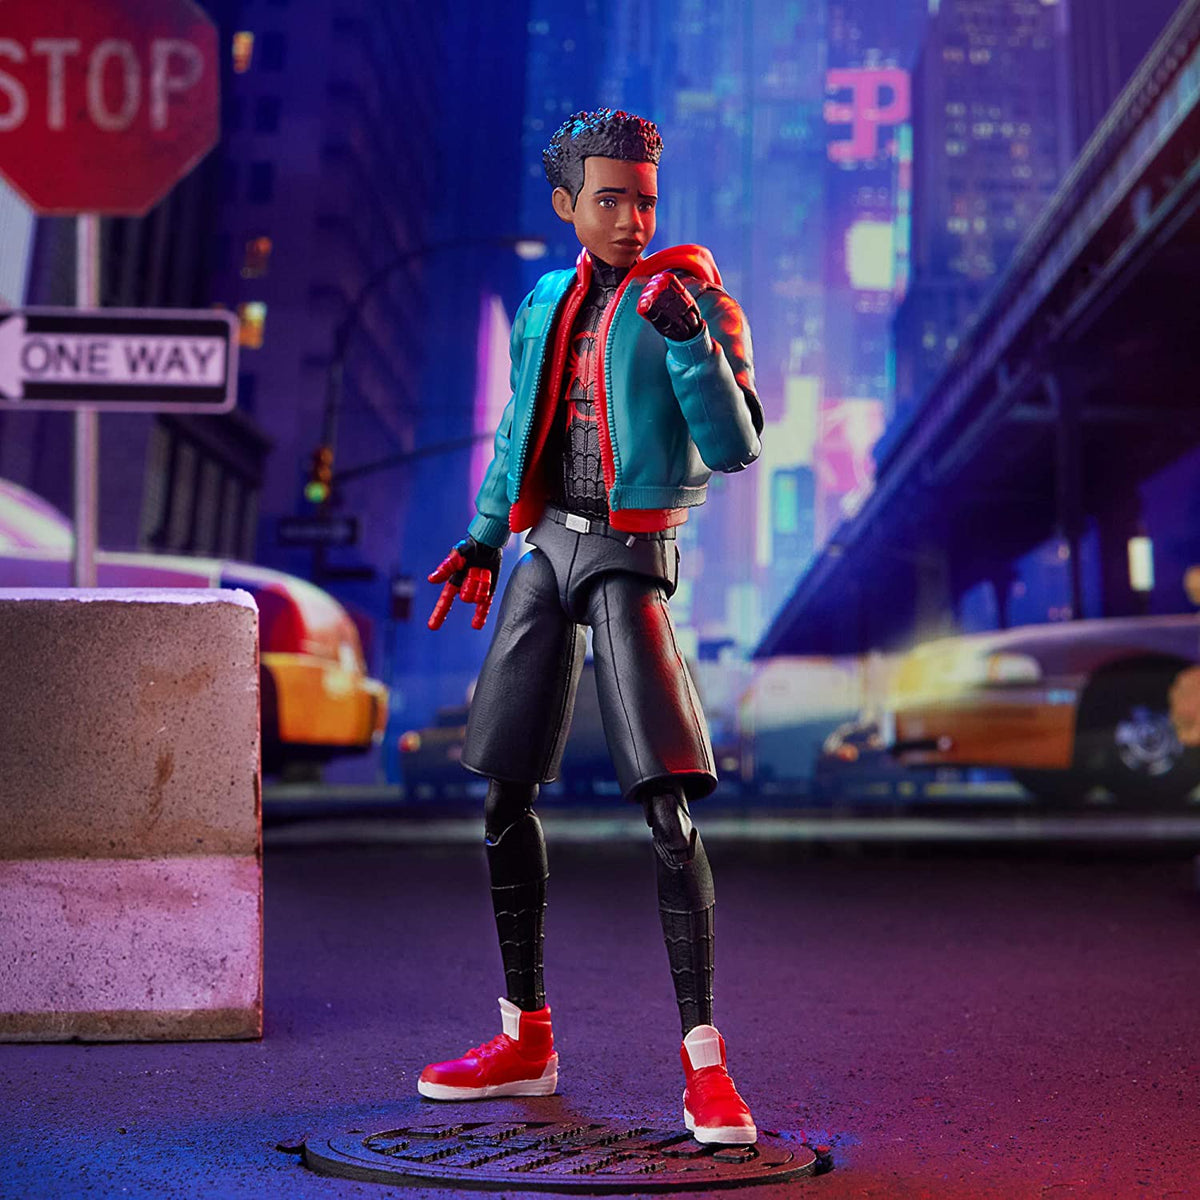 Spider-Man Legends Series Into The Spider-Verse Miles Morales 6-inch Collectible Action Figure Toy